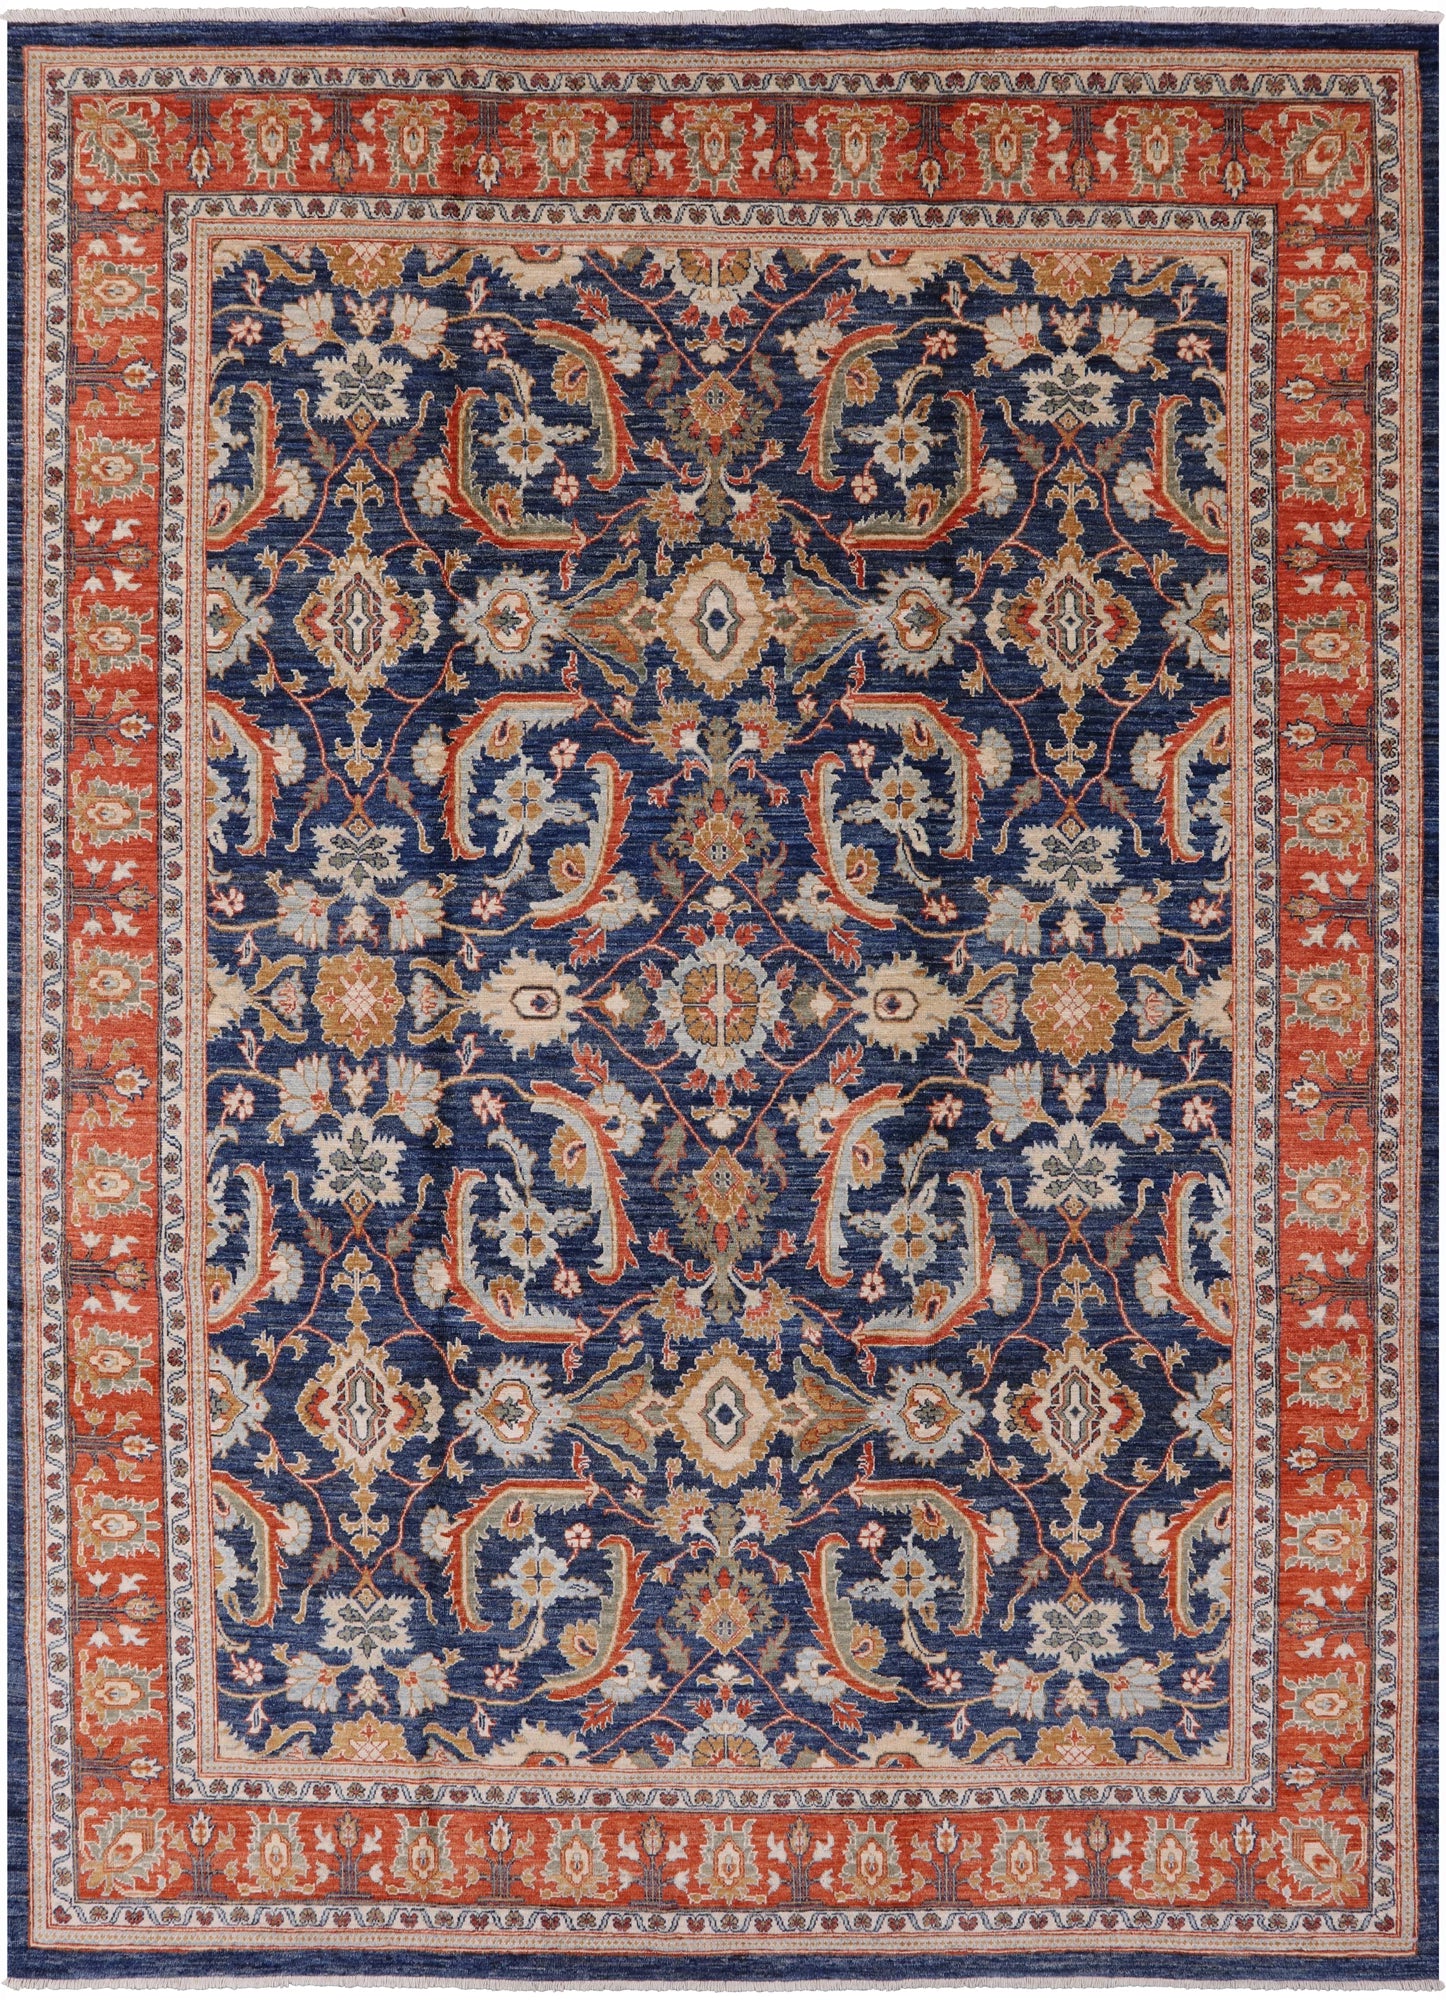 Hand Knotted Wool Rug, Blue, Area Rug